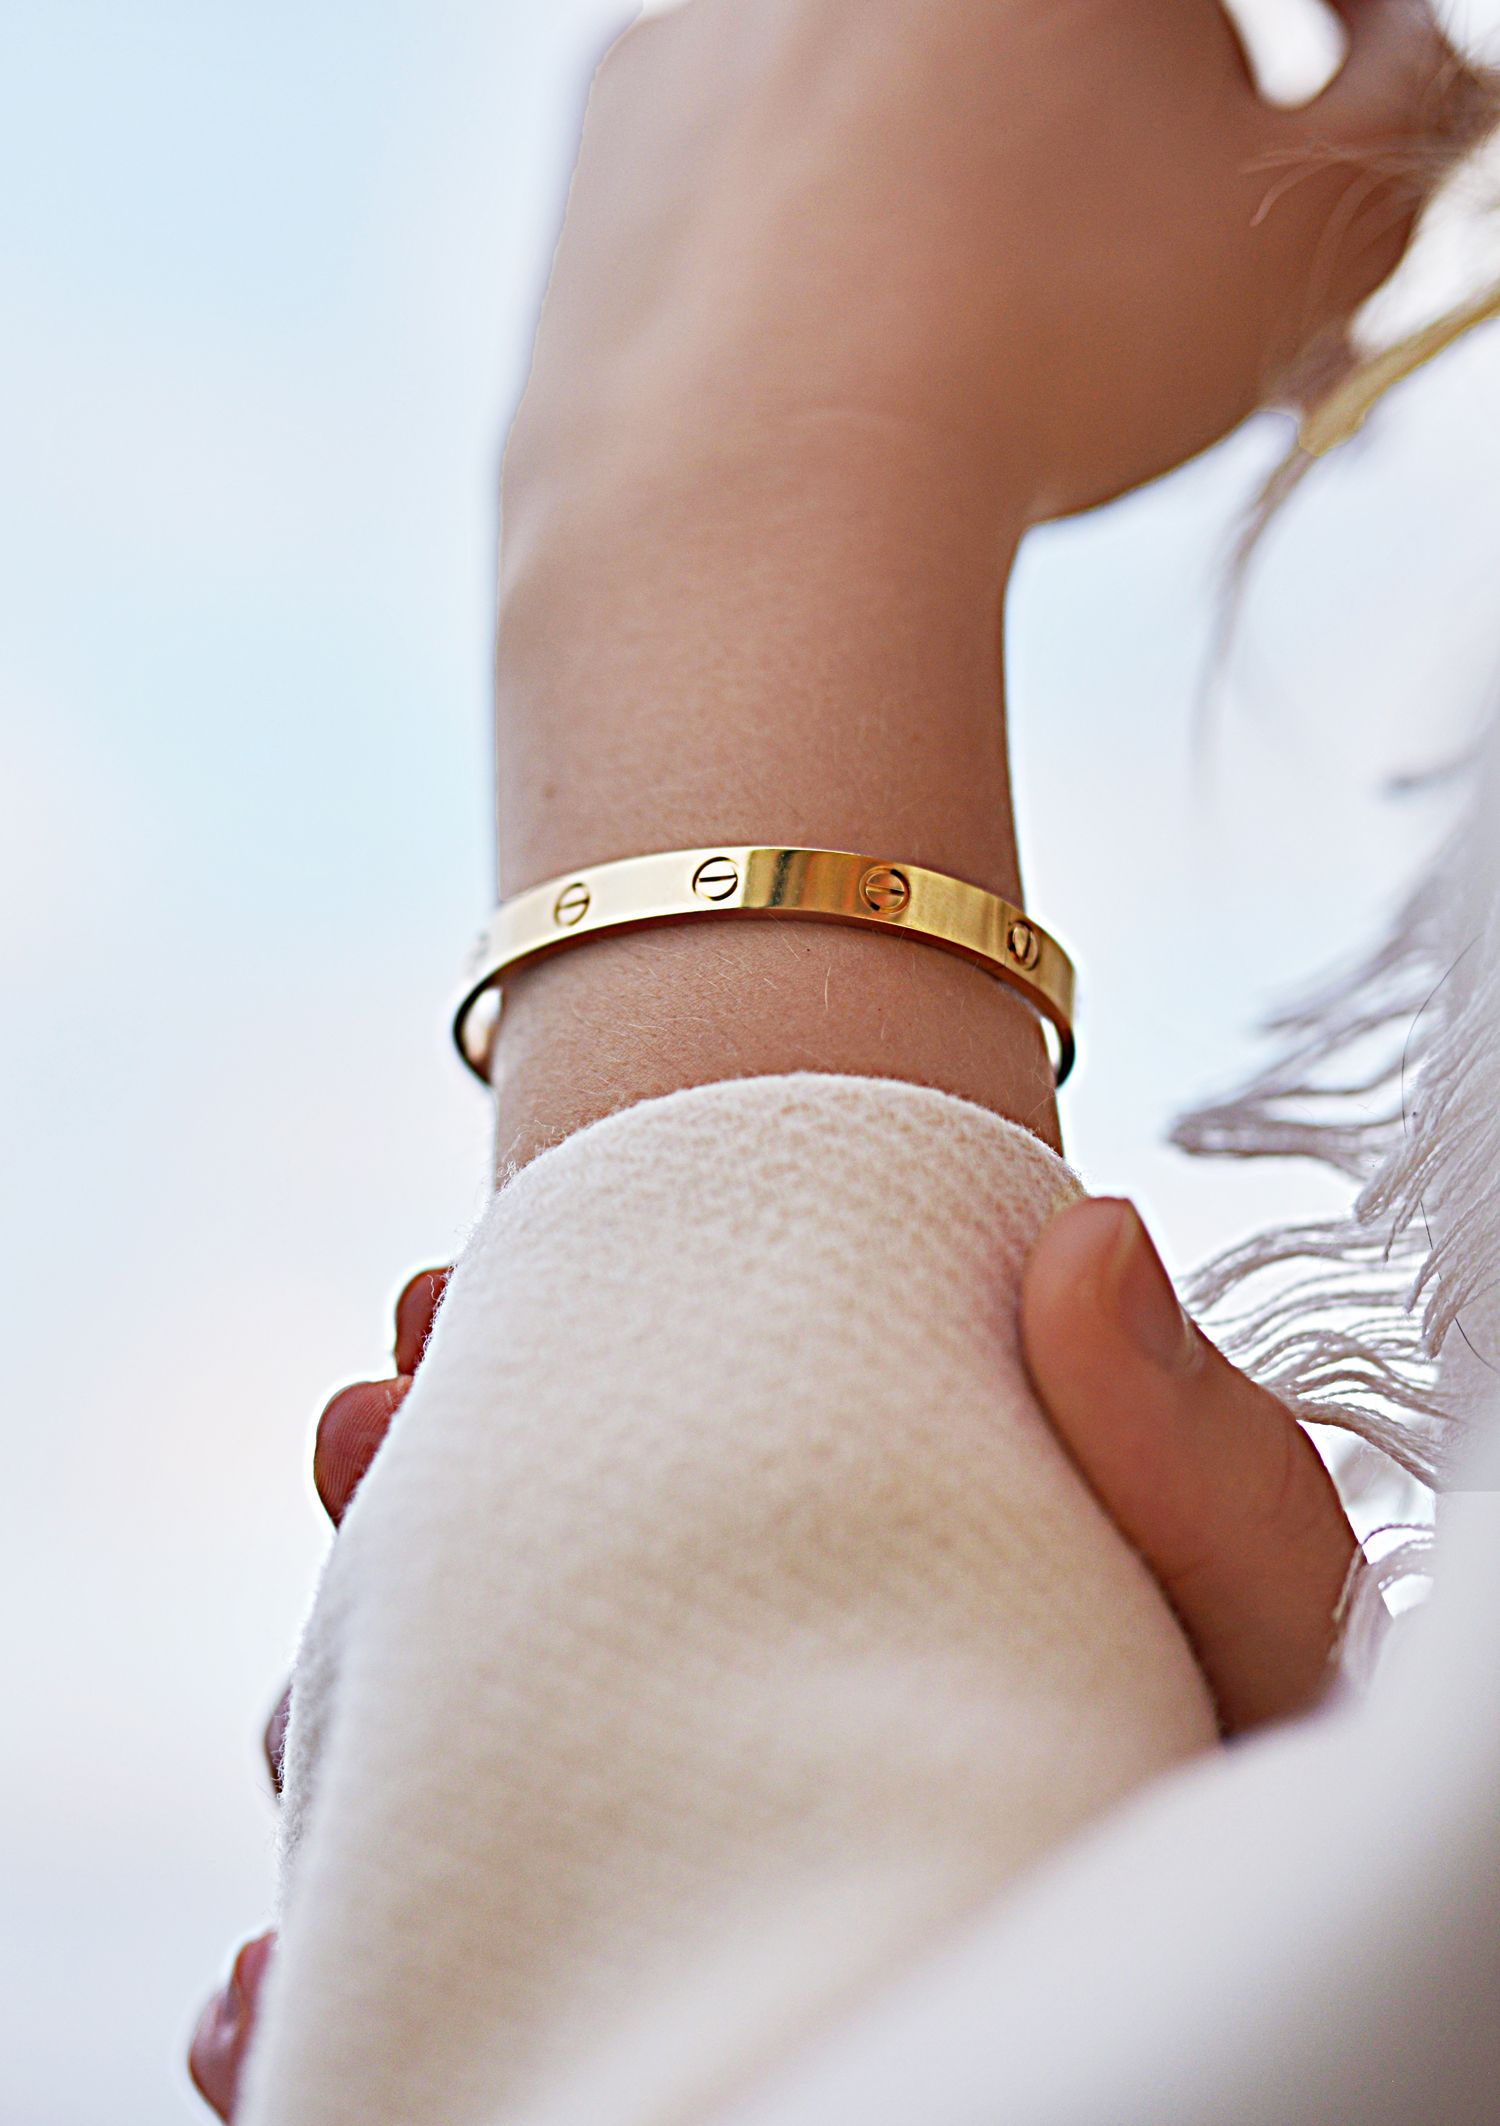 is the cartier love bracelet real gold